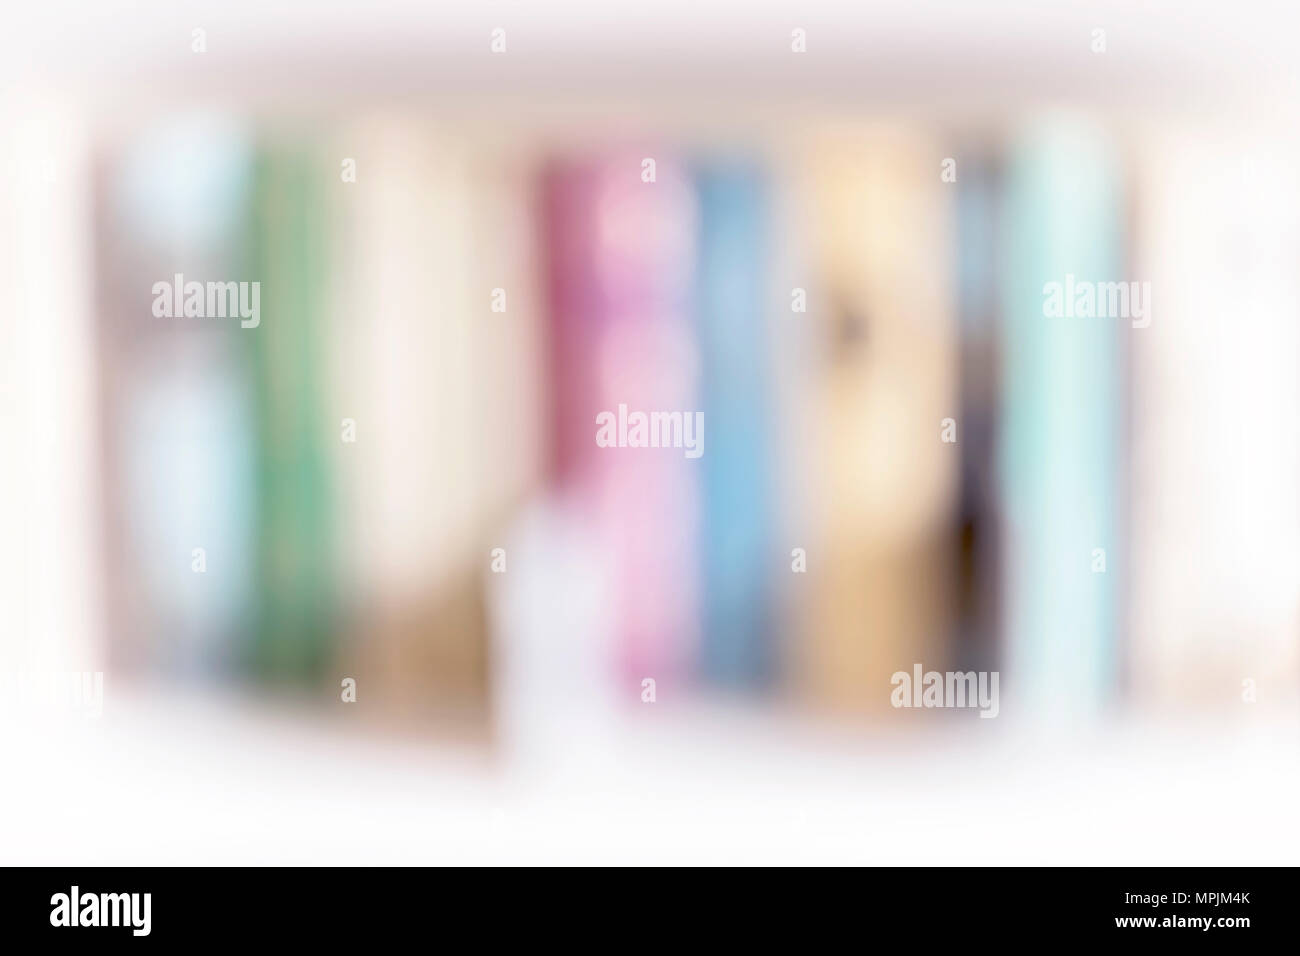 Row of colorful blank books, light blurred background. Blurred bookshelves of bookcase with books, studing, education. Light filter effect, soft focus Stock Photo